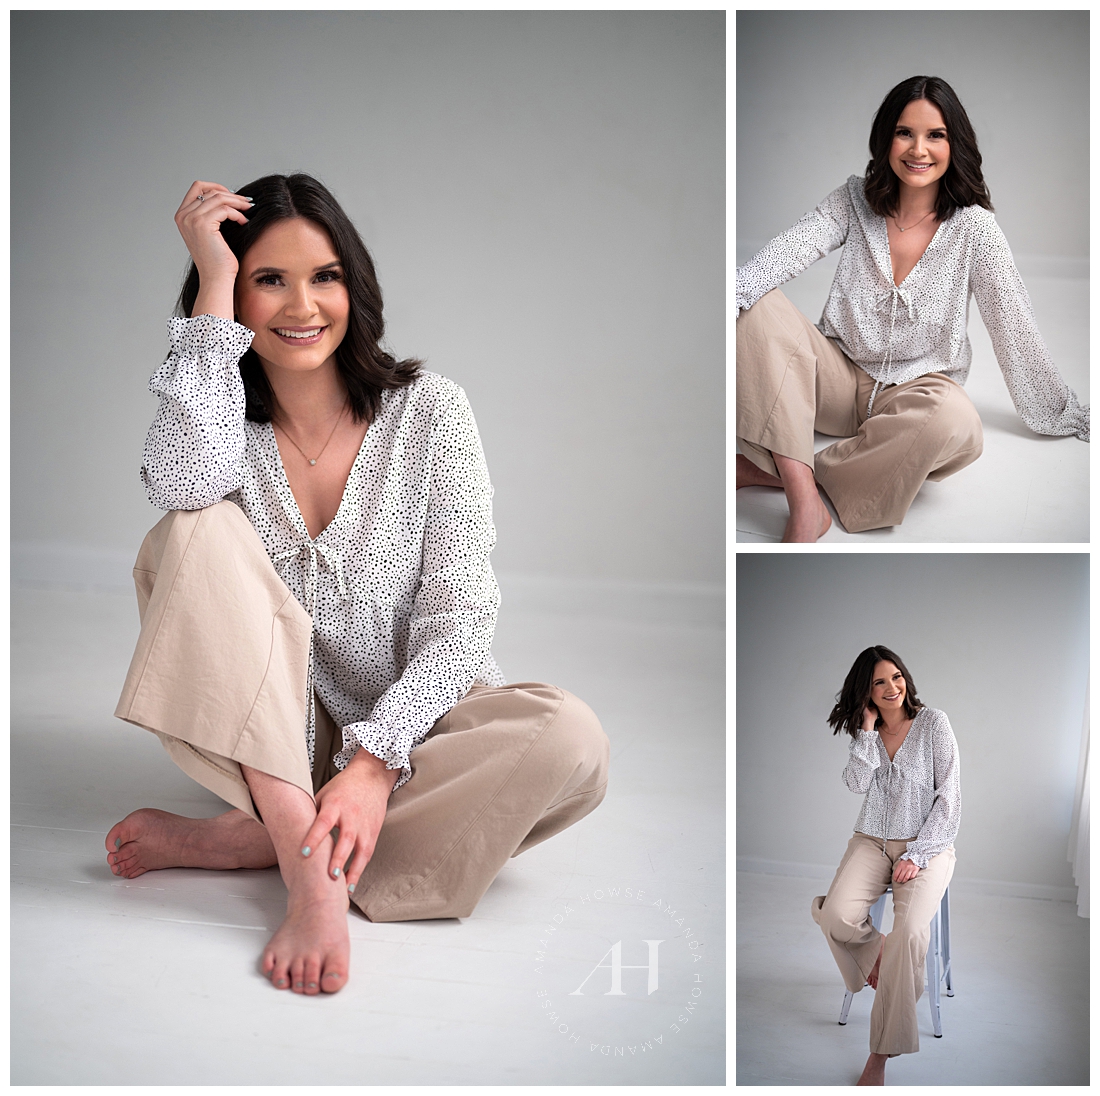 Fun and Relaxed Poses to Add to Your Next Business Portraits | Headshots by Amanda Howse Photography